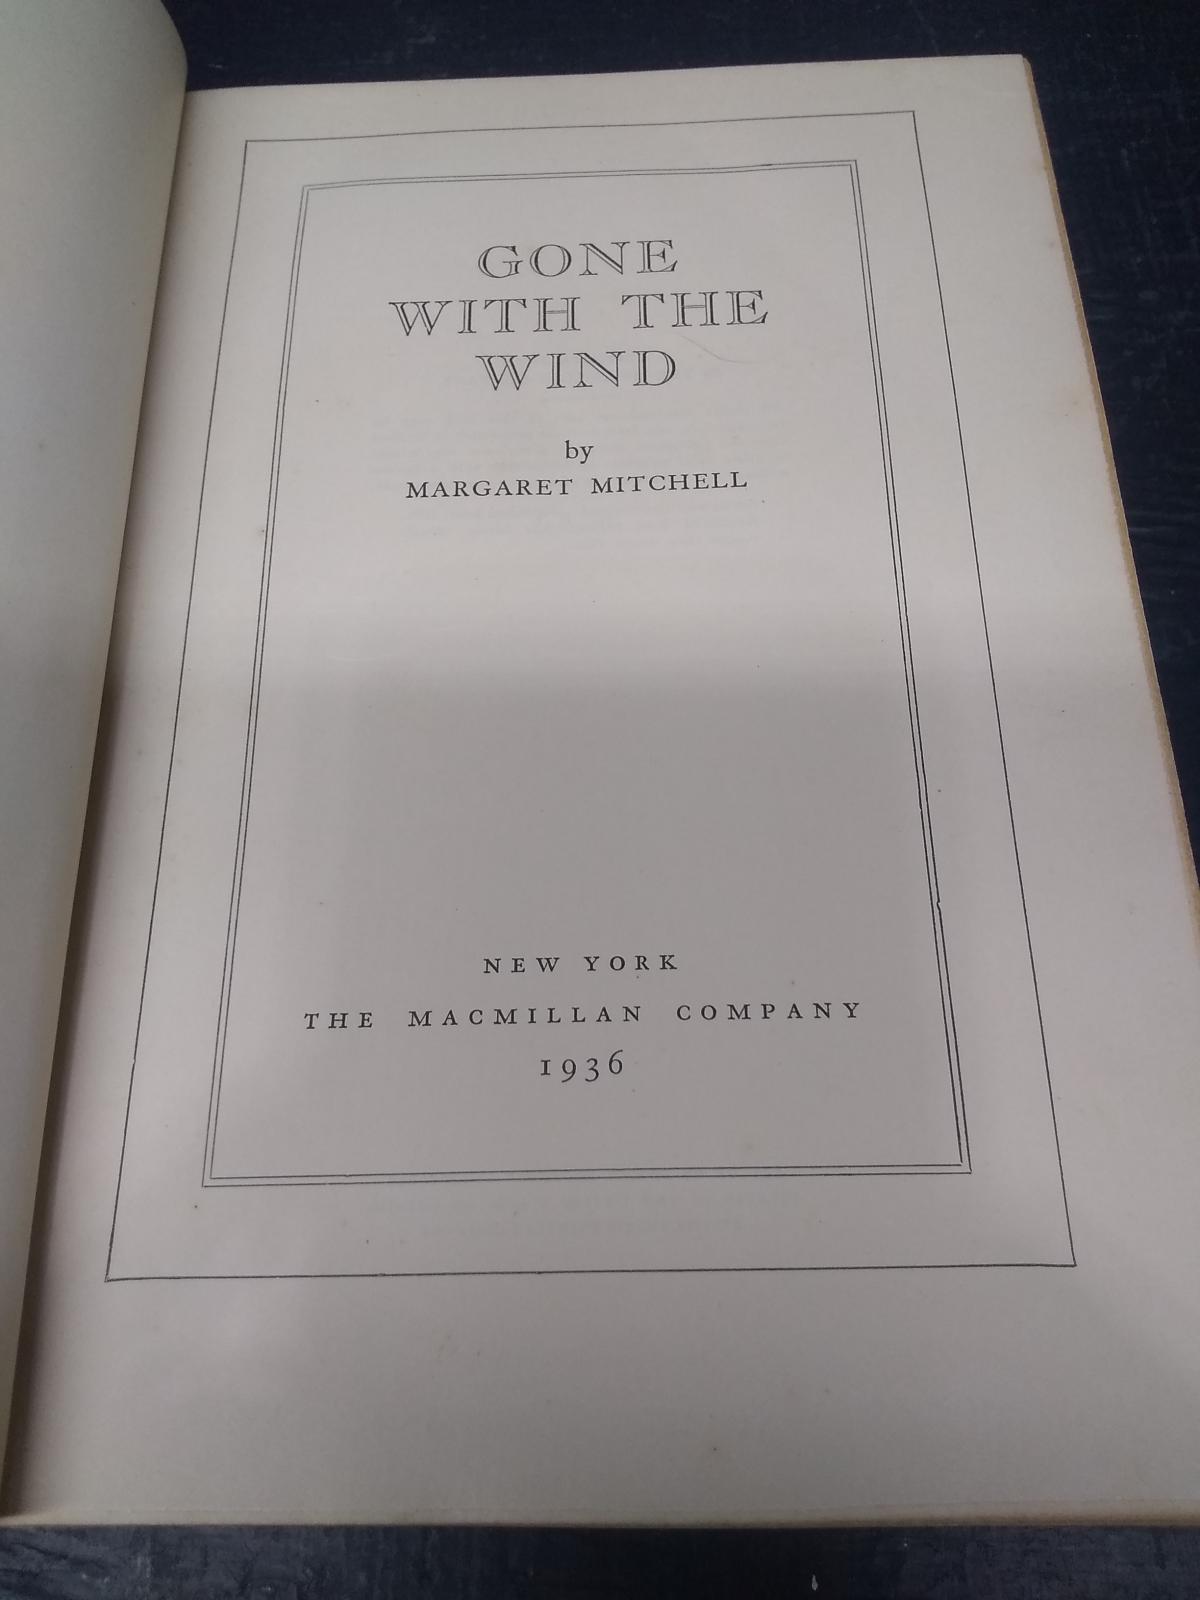 Vintage book-Gone with the Wind 1936